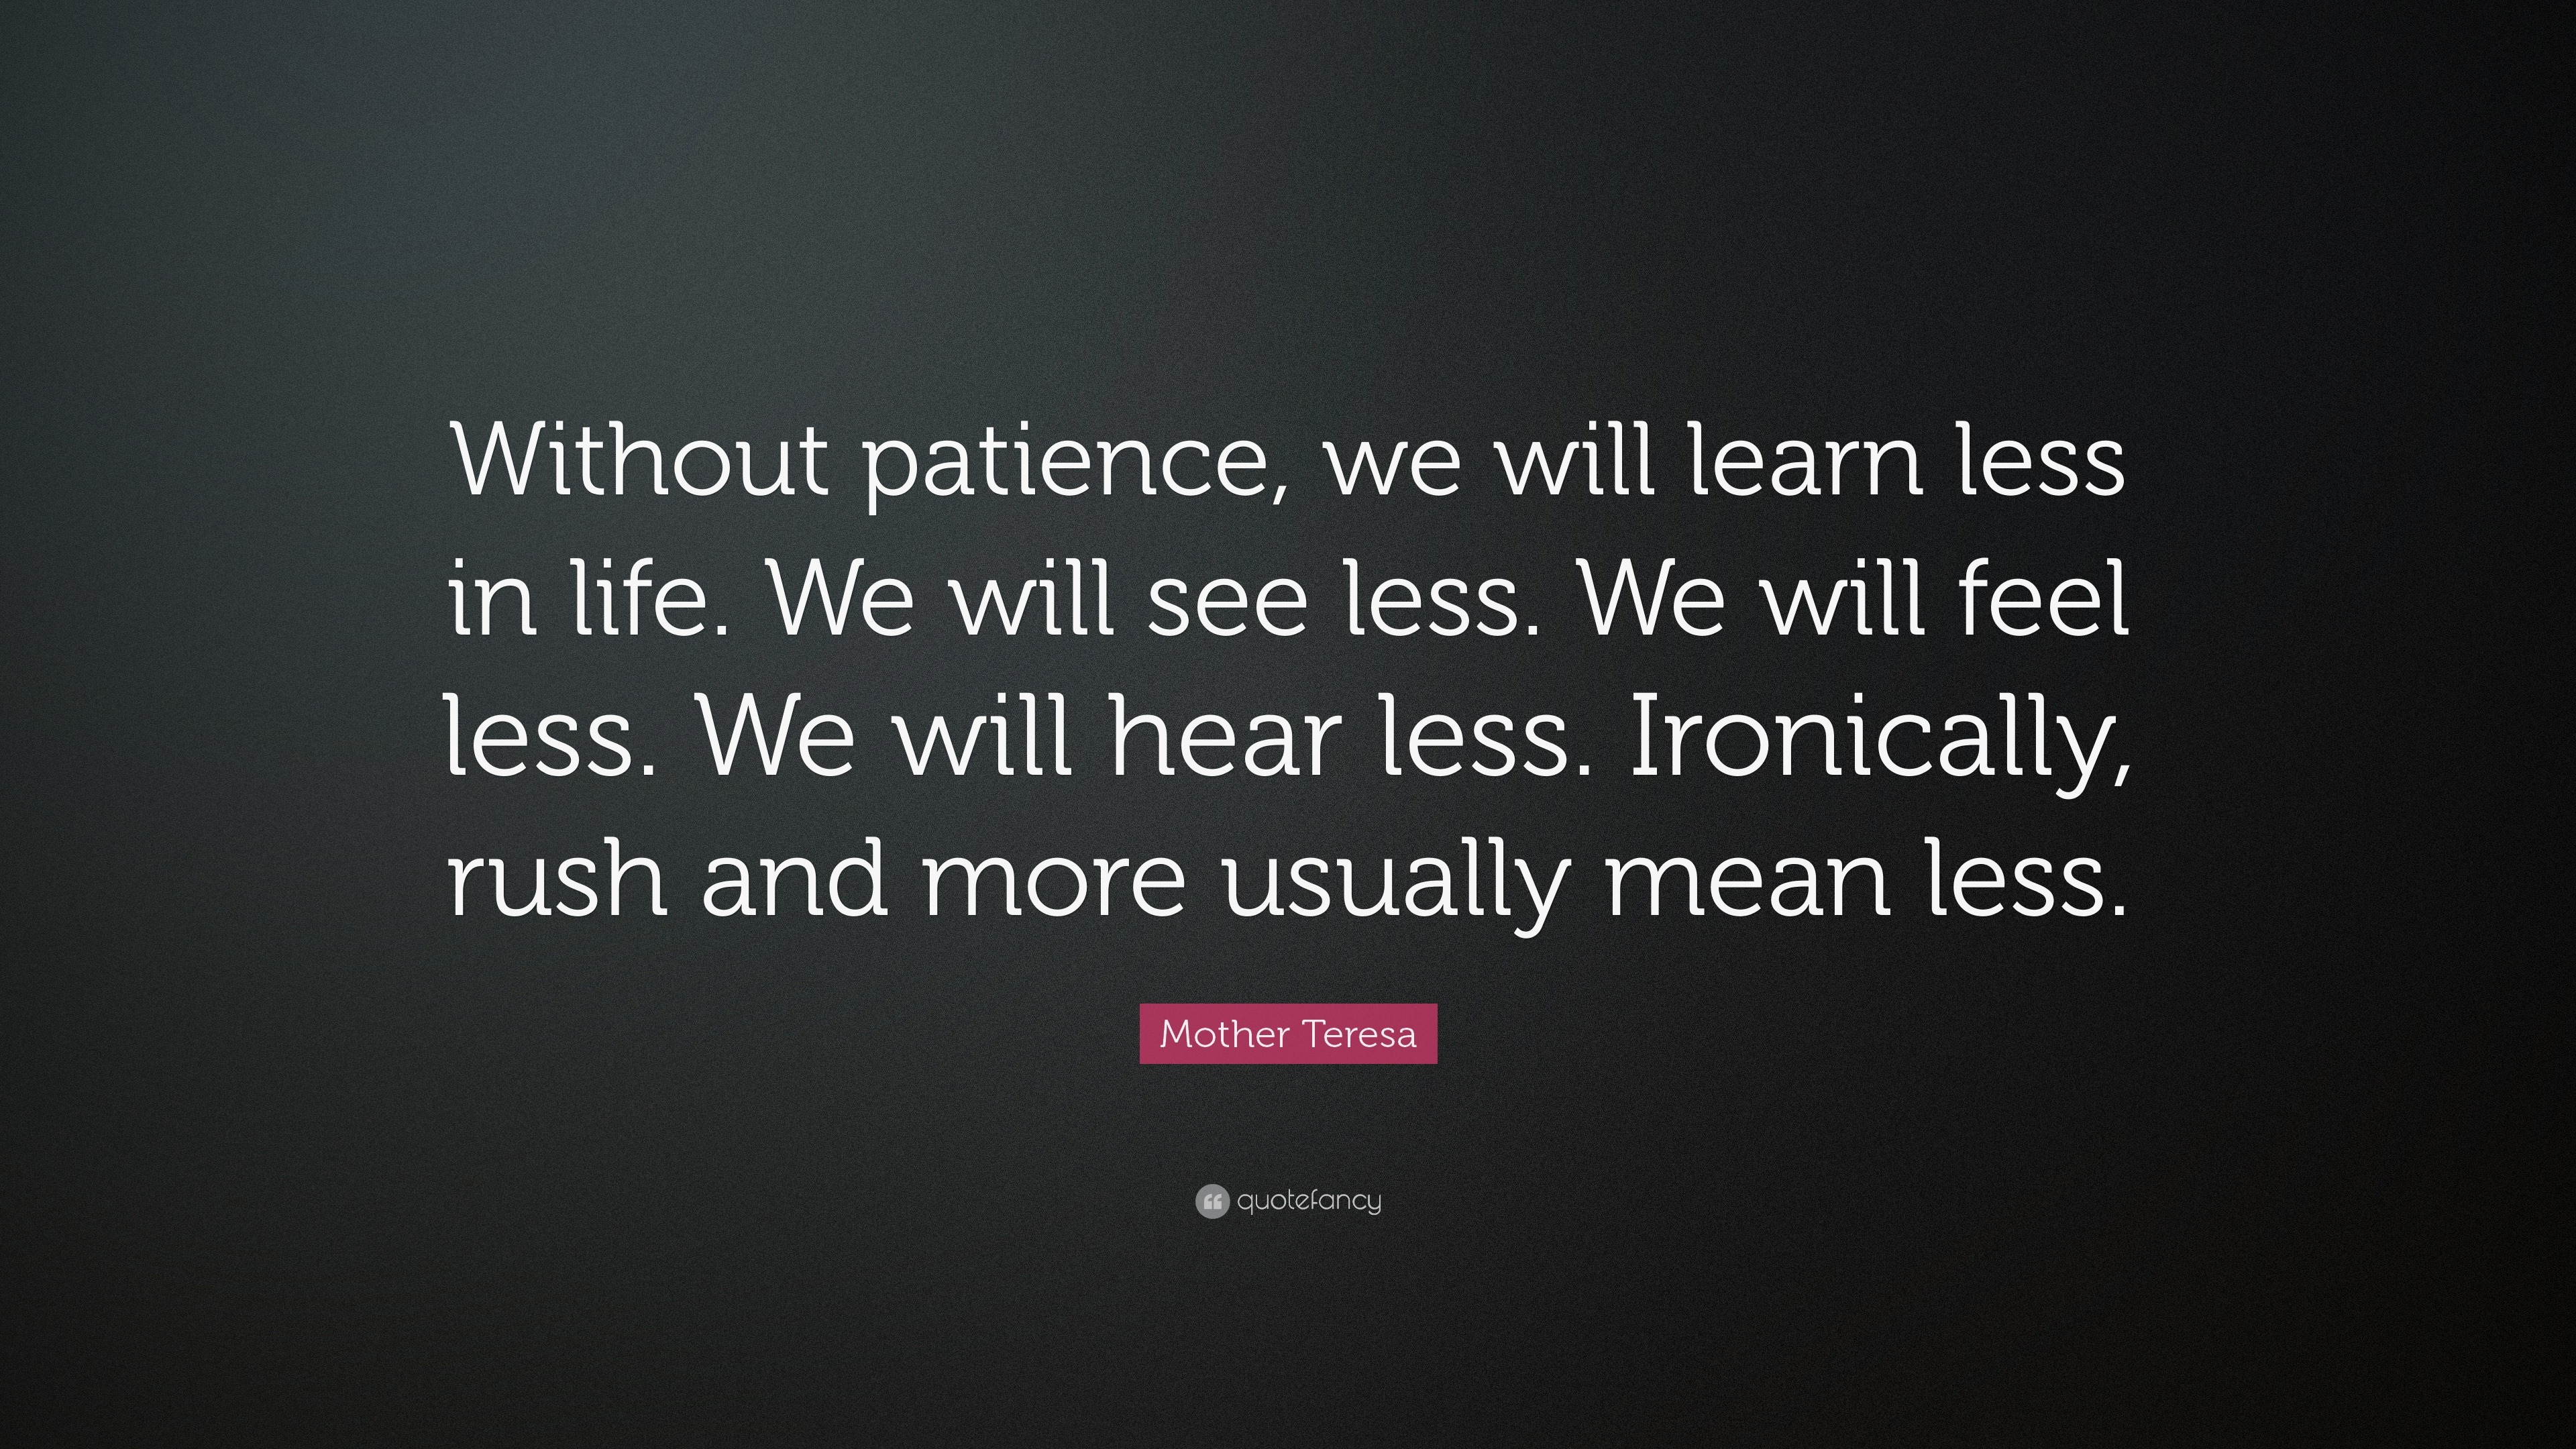 Mother Teresa Quote: “Without patience, we will learn less in life. We